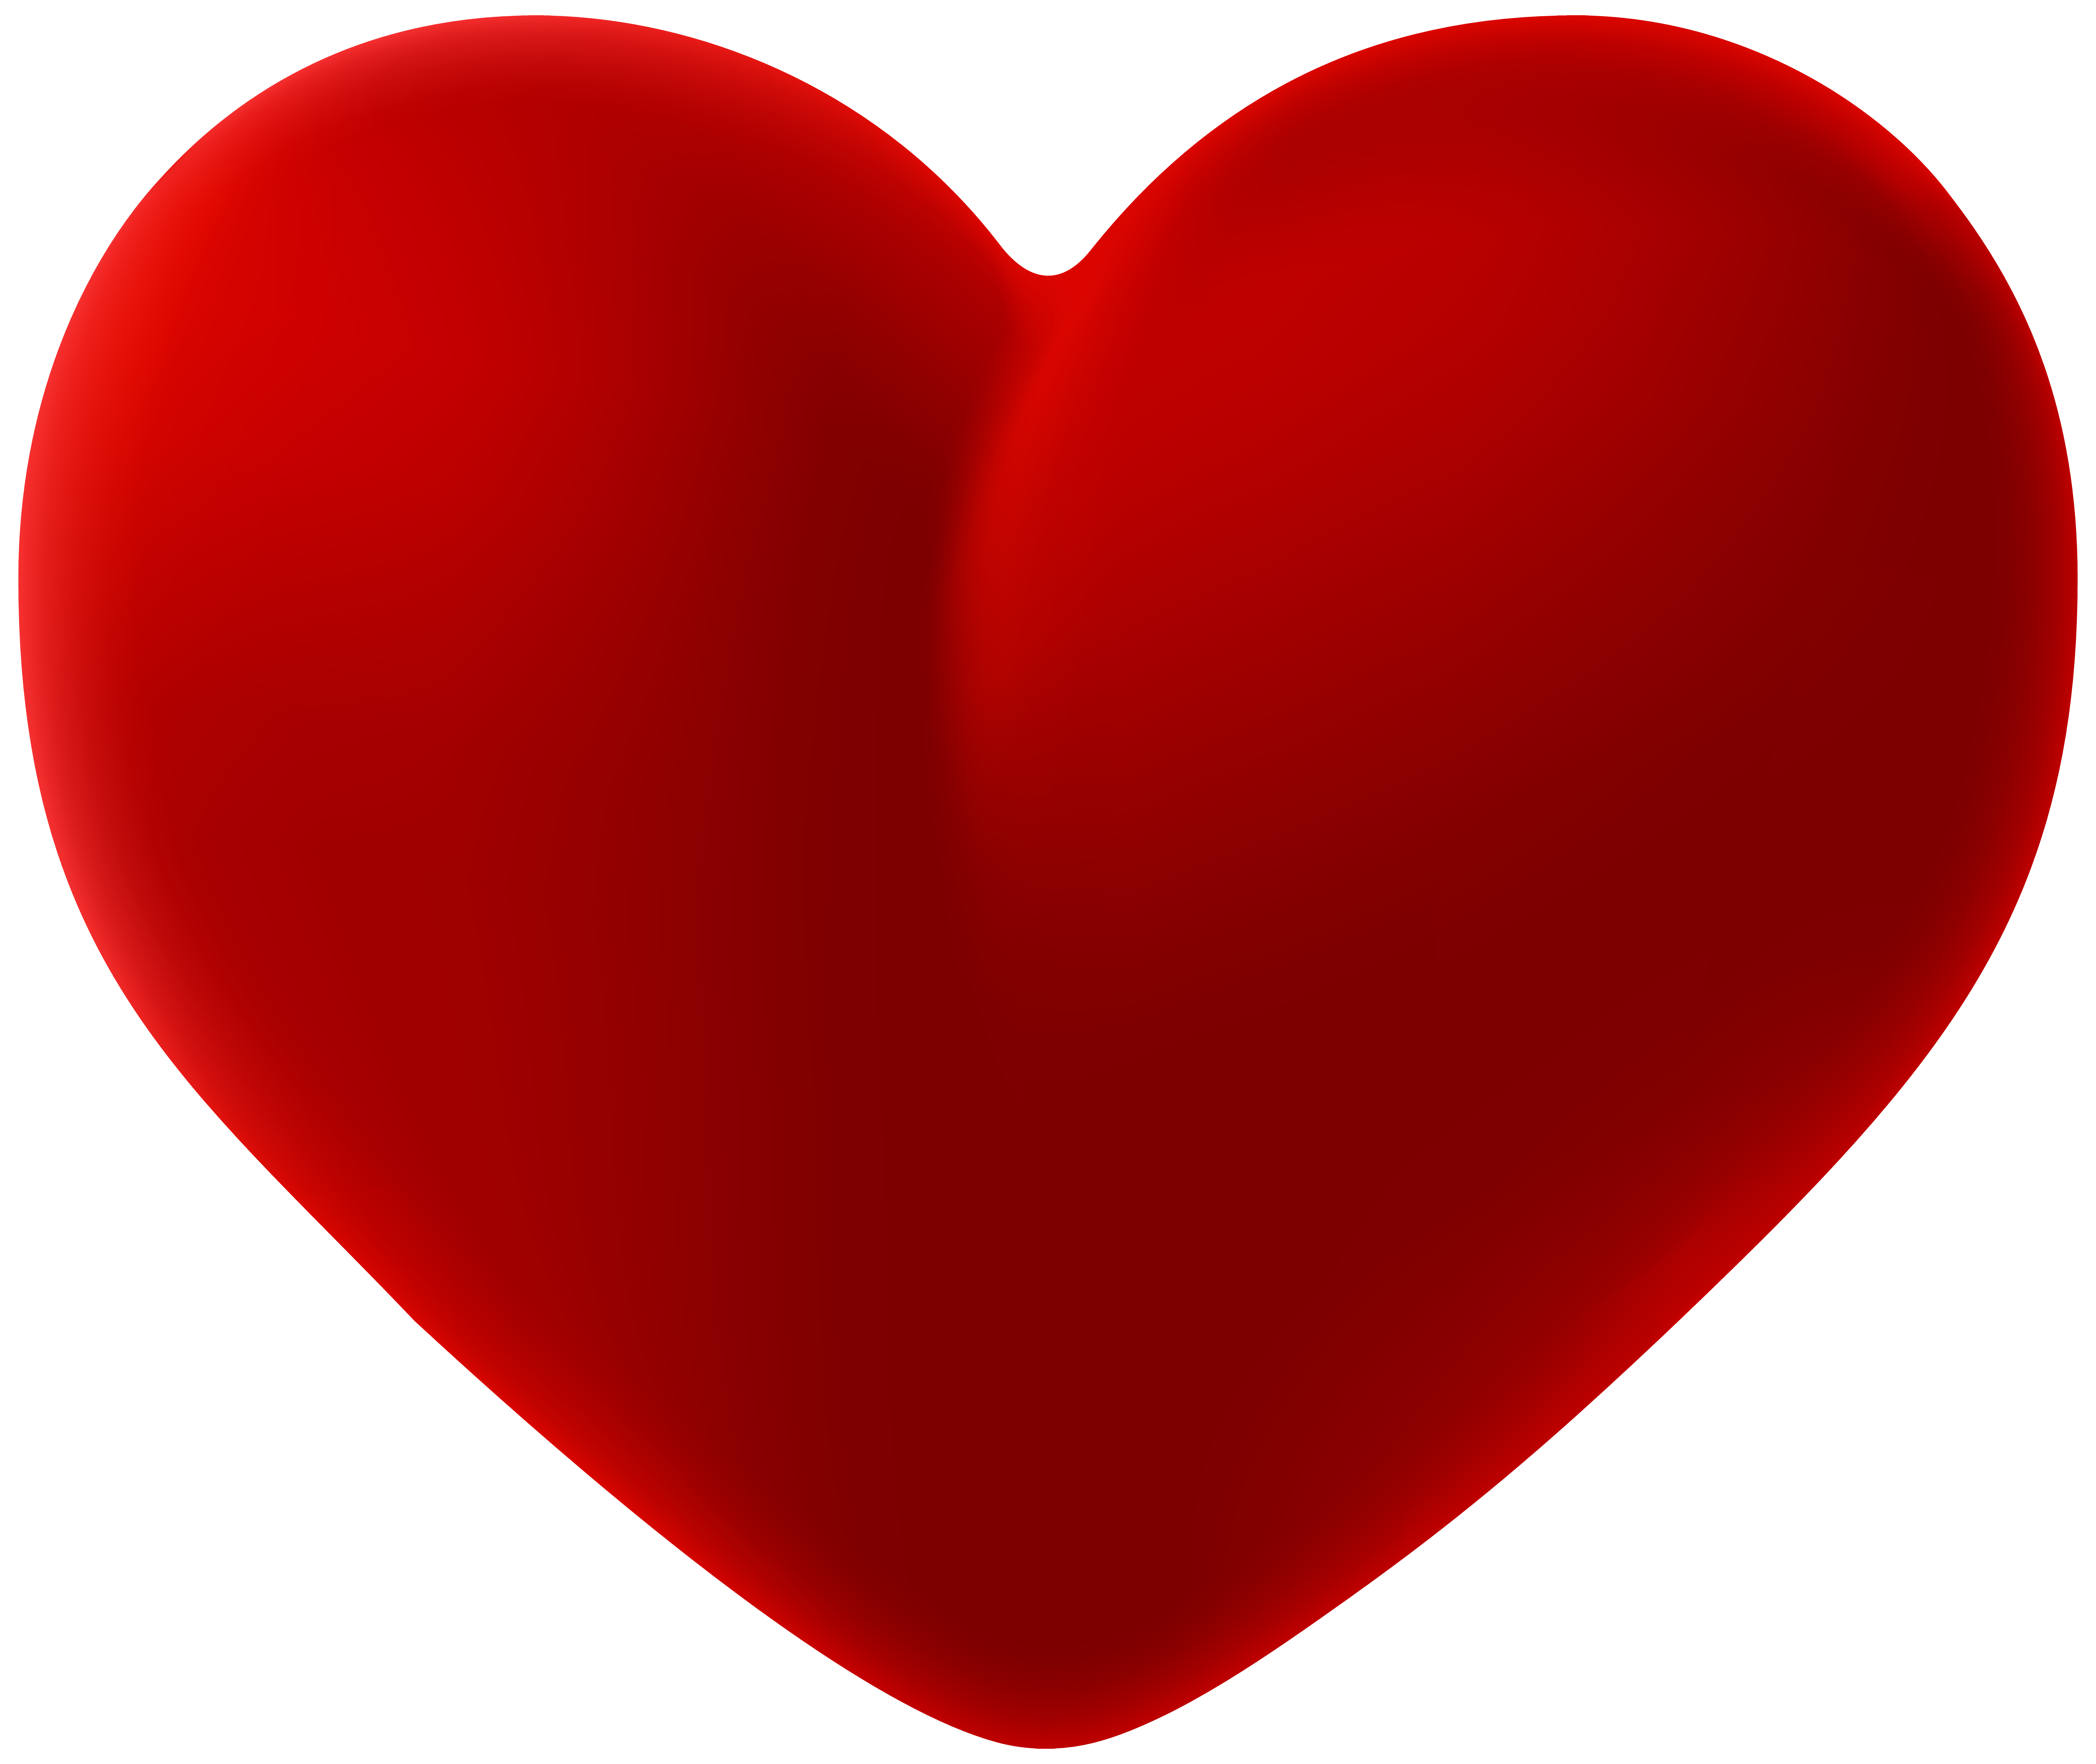 Beautiful Heart Images Free